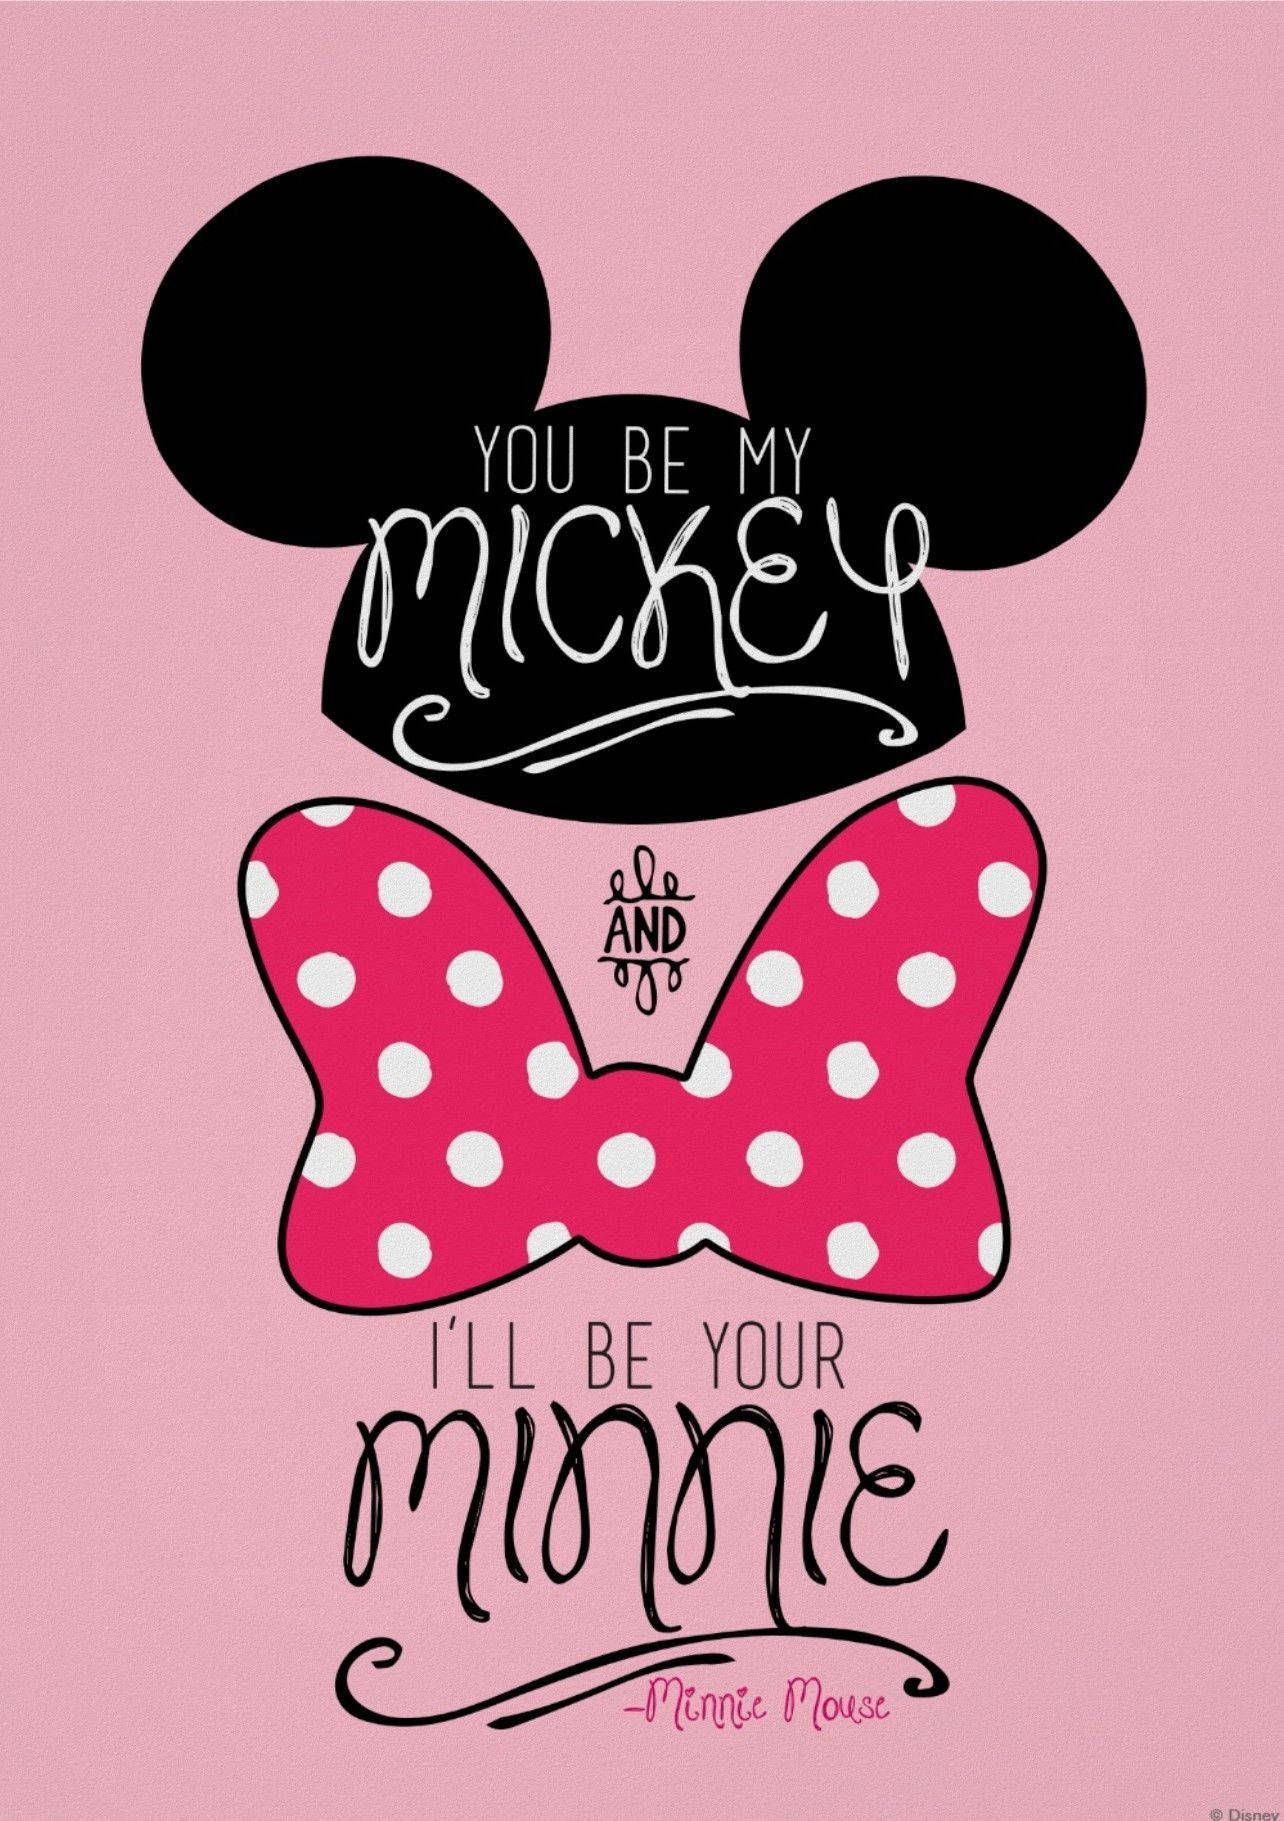 Minnie Mouse Disney Wallpapers